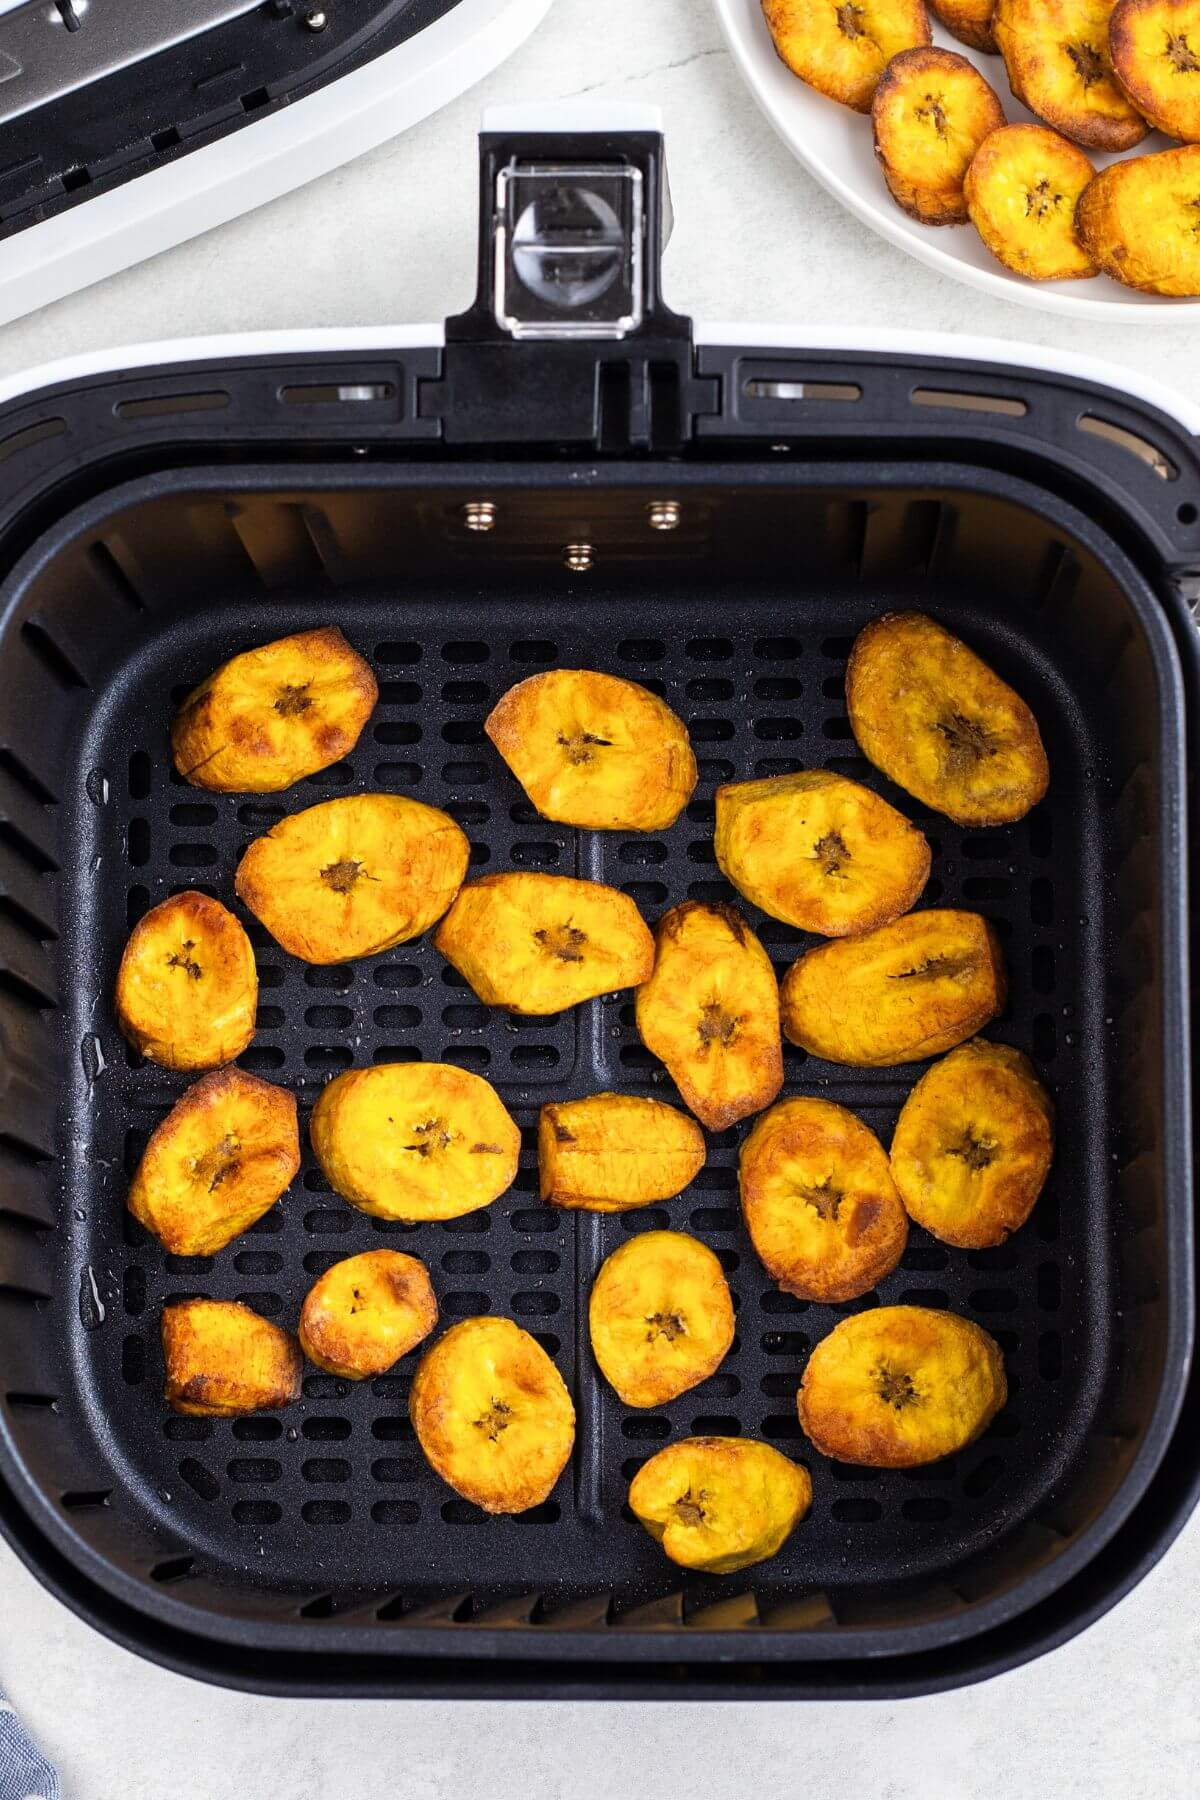 Golden brown plantain slices in the air fryer basket after being cooked. 